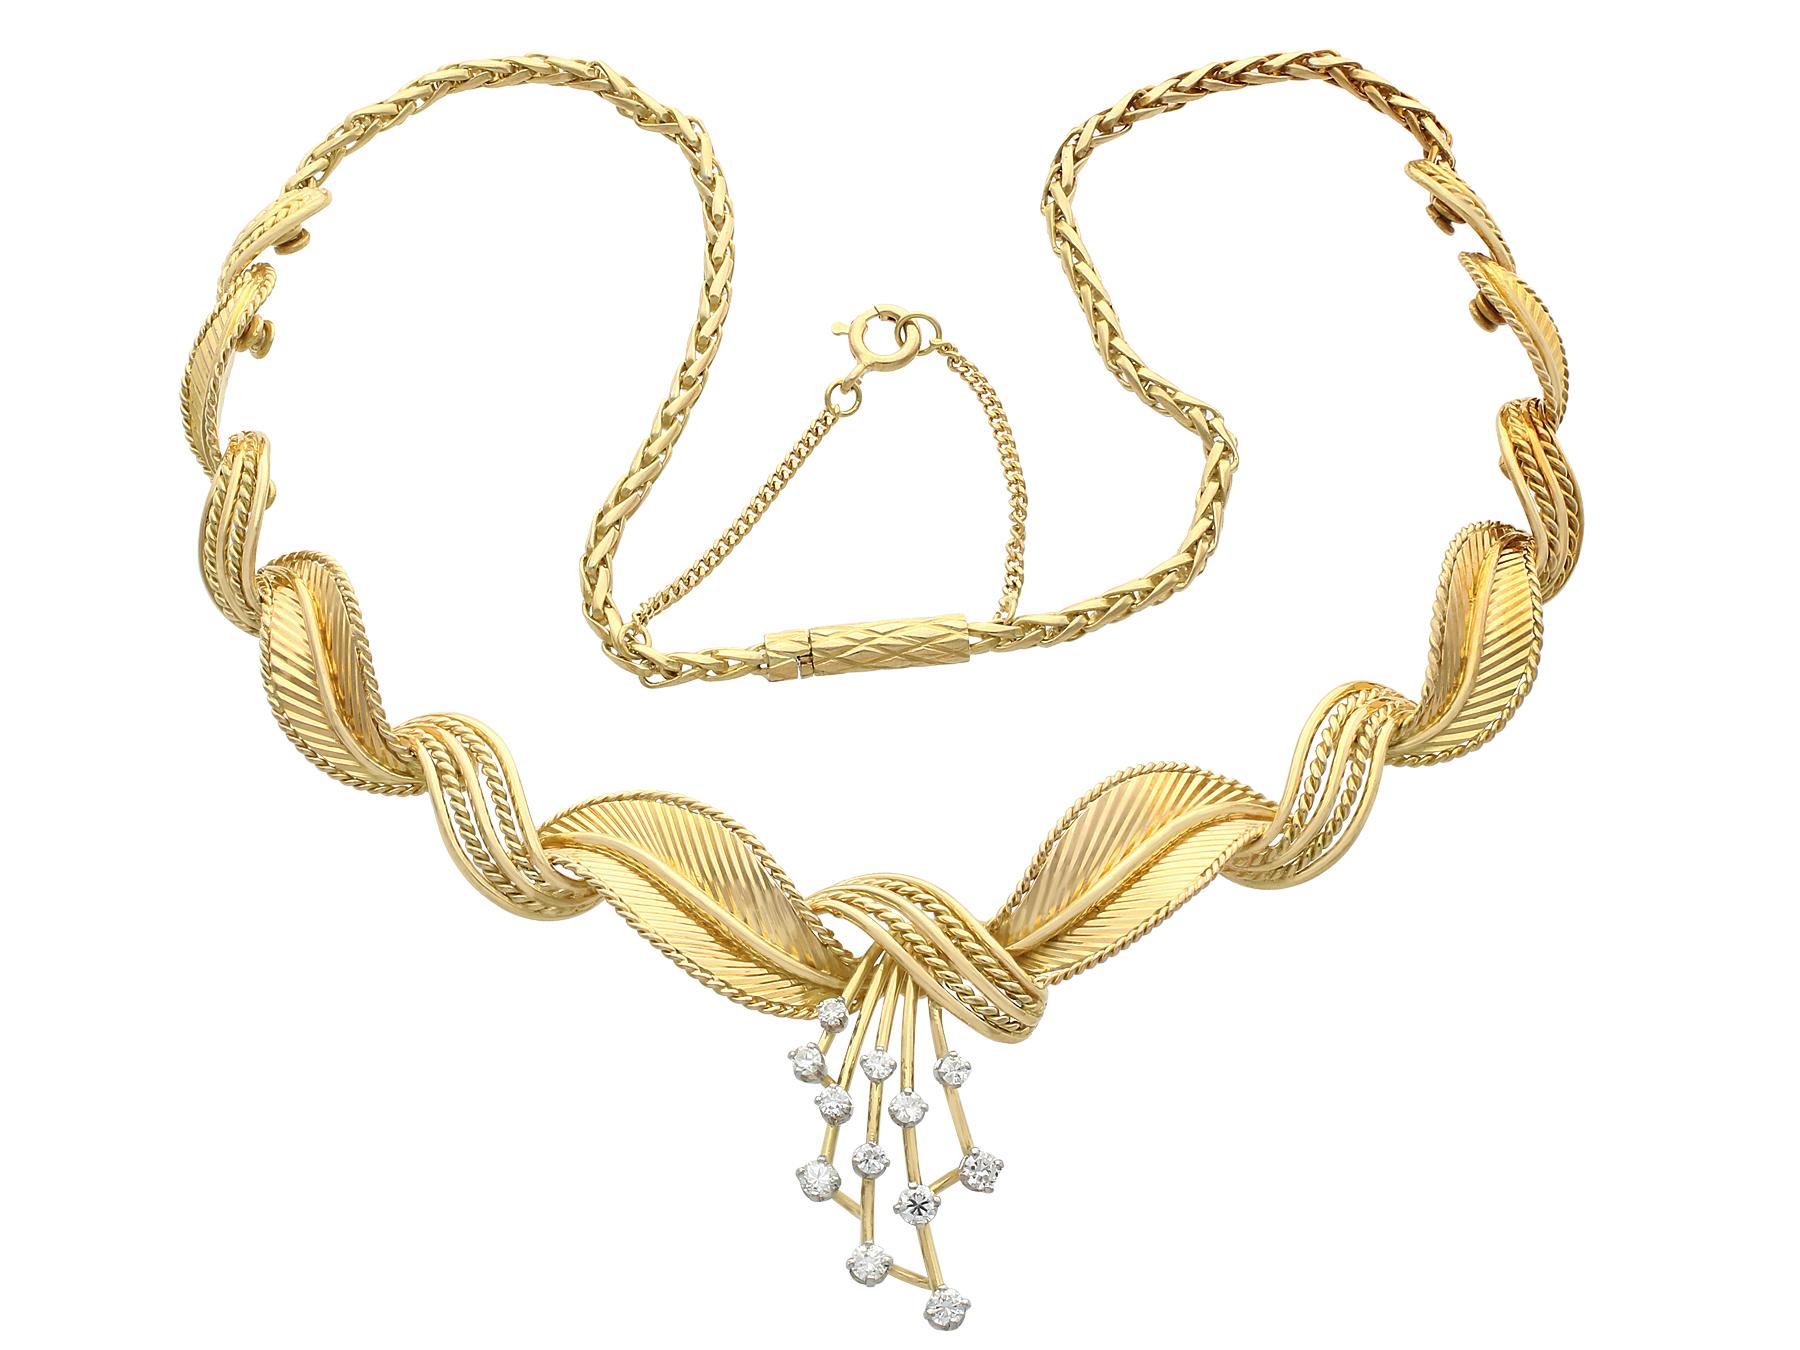 A stunning vintage Belgian 1950s 0.54 carat diamond and 18 karat yellow gold necklace; part of our diverse vintage jewelry and estate jewelry collections.

This stunning, fine and impressive vintage diamond necklace has been crafted in 18k yellow